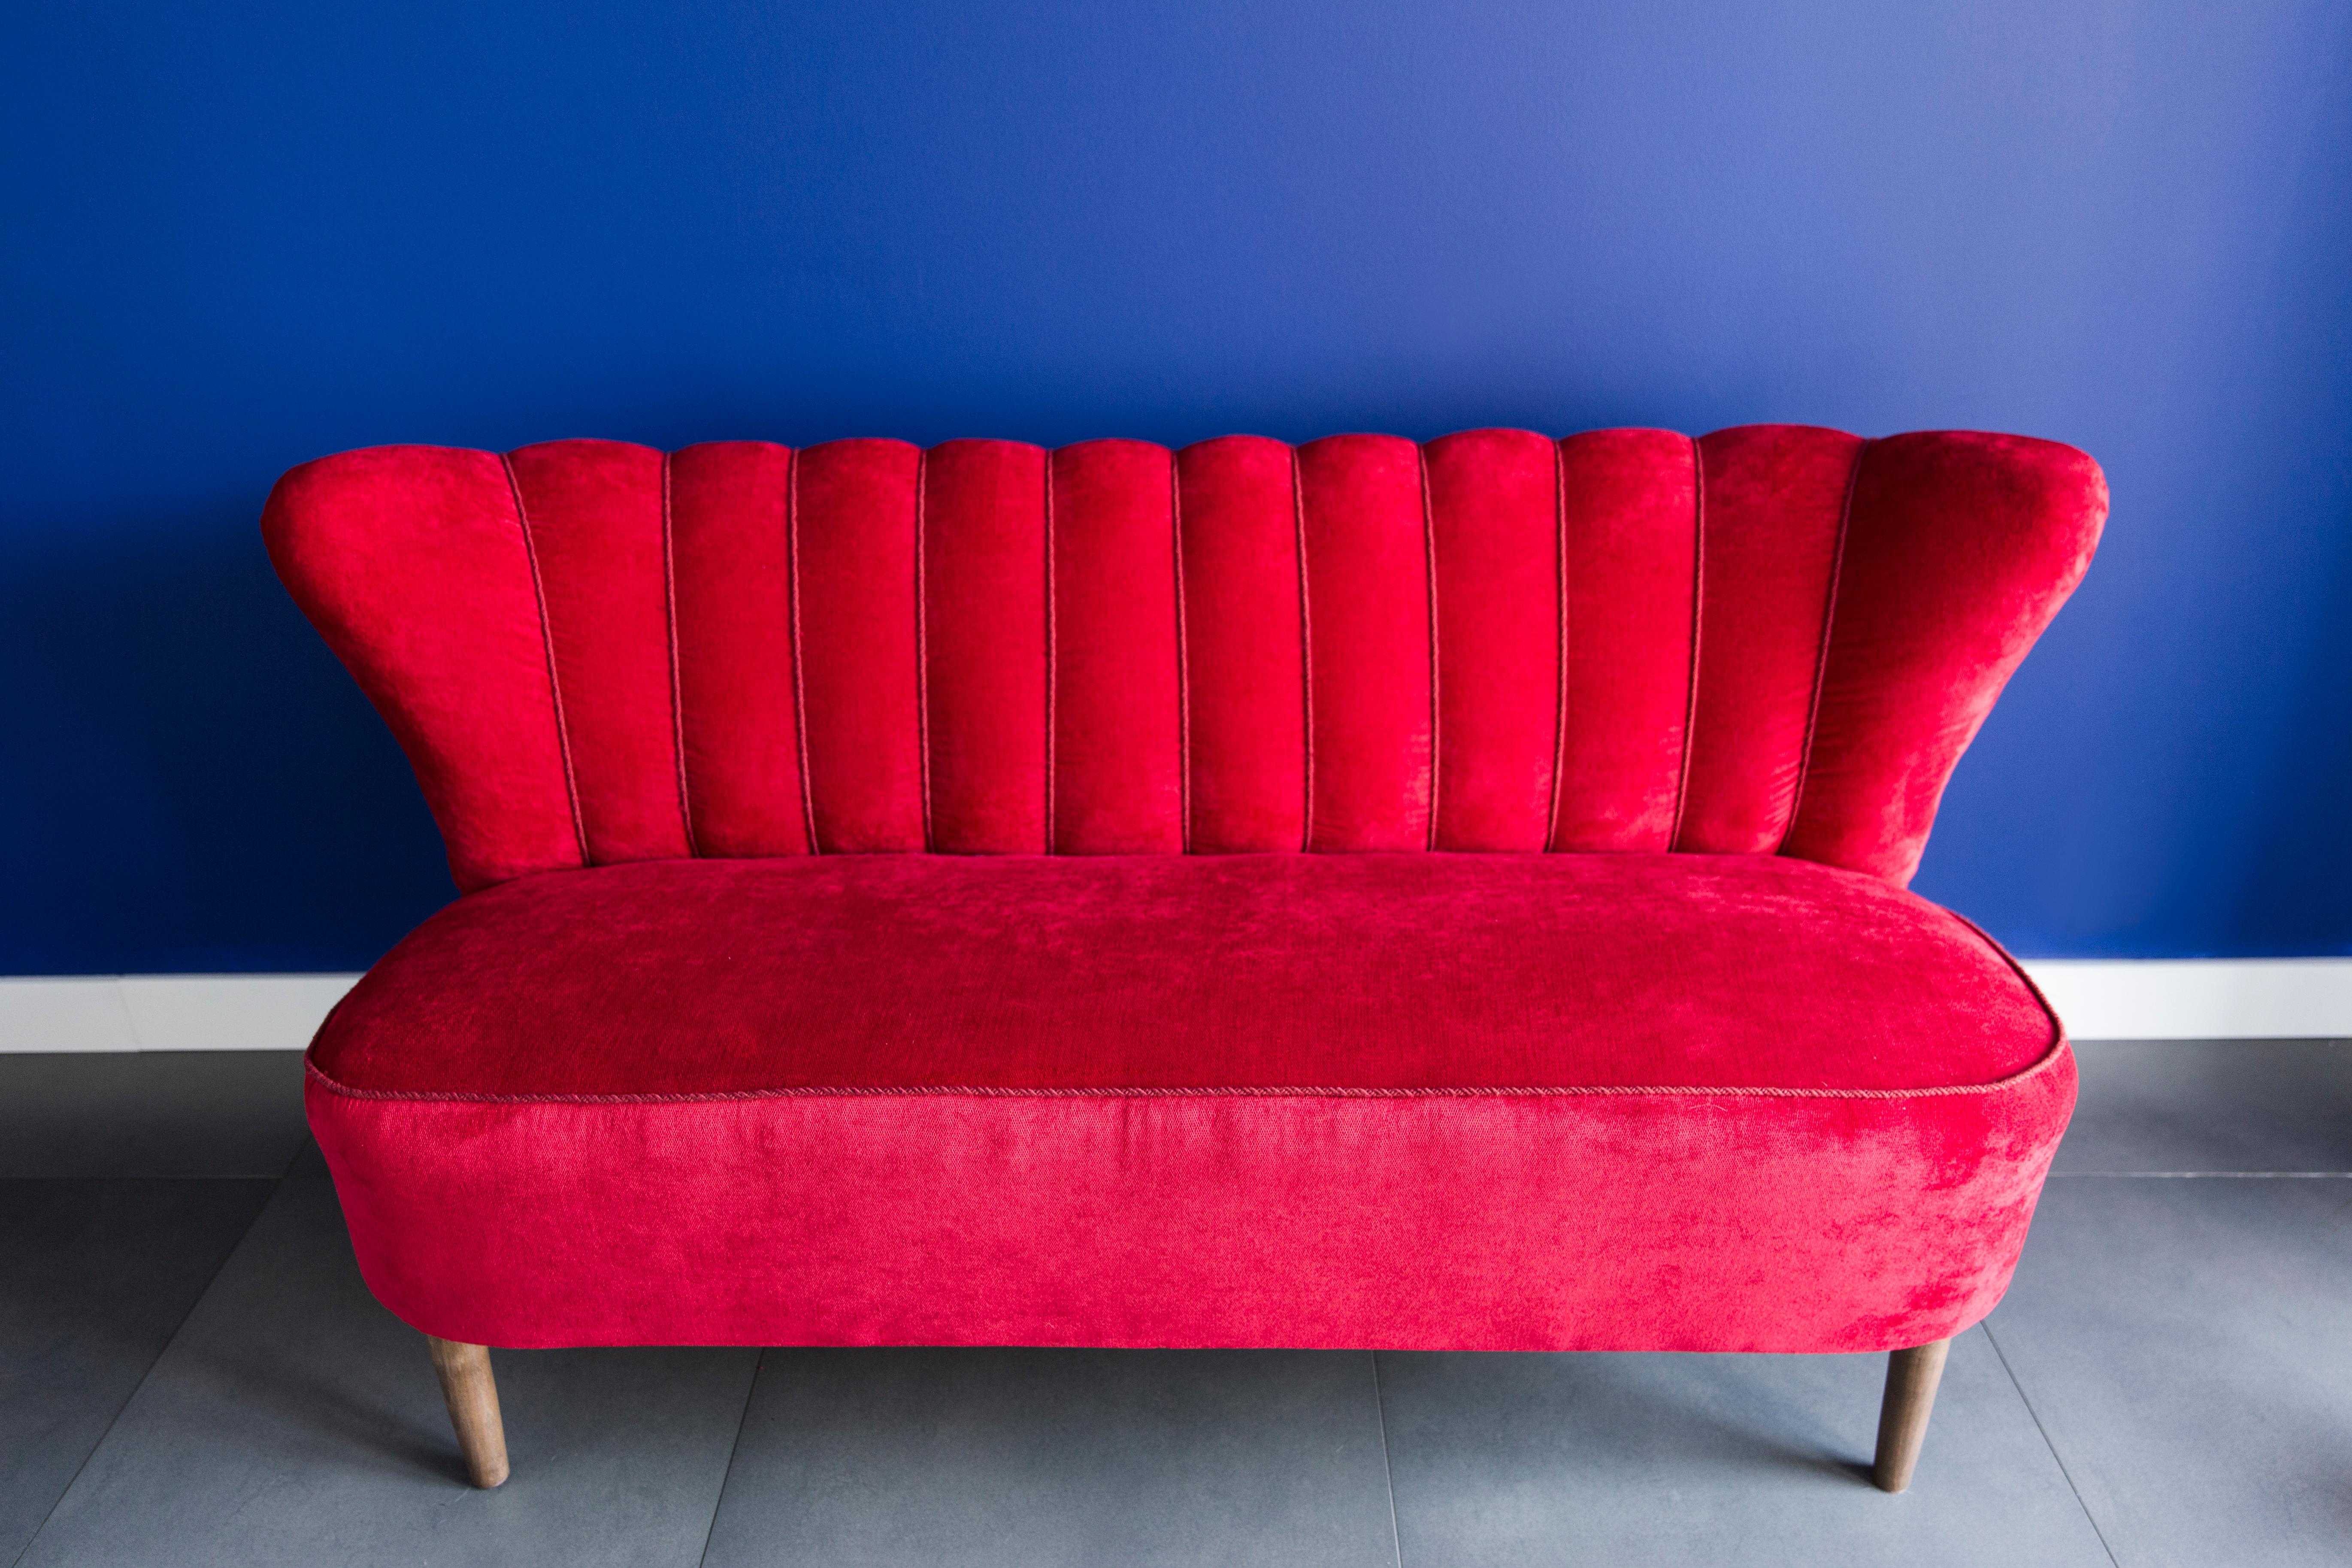 Beautiful club sofa from the 1960s, produced in Germany, at the moment they are unique. Due to their dimensions, they perfectly blend in even in small apartments providing comfort and beautiful decoration. Covered with high-quality velvet fabric, a